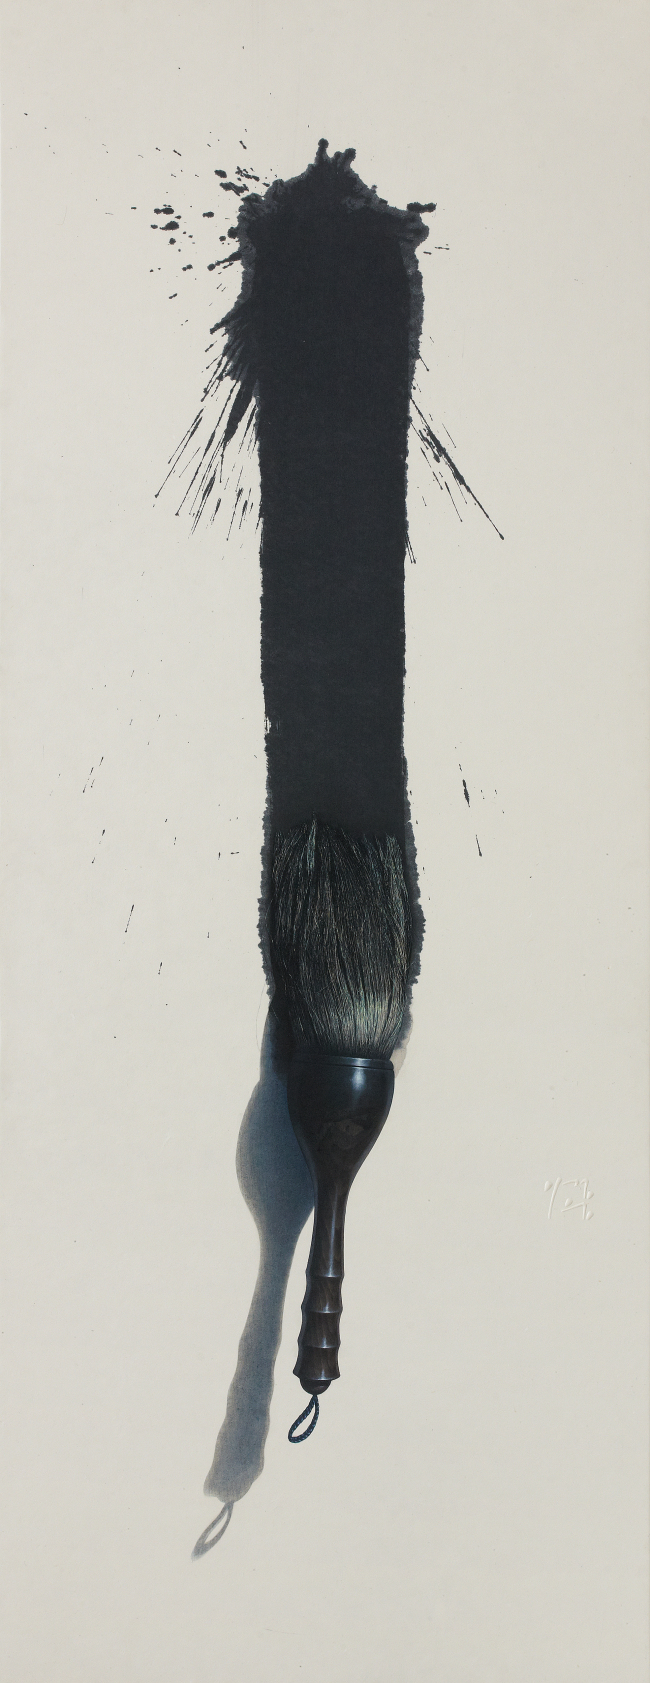 The artwork "Brush by Lee Jung-woong of a single stroke across paper vertically.